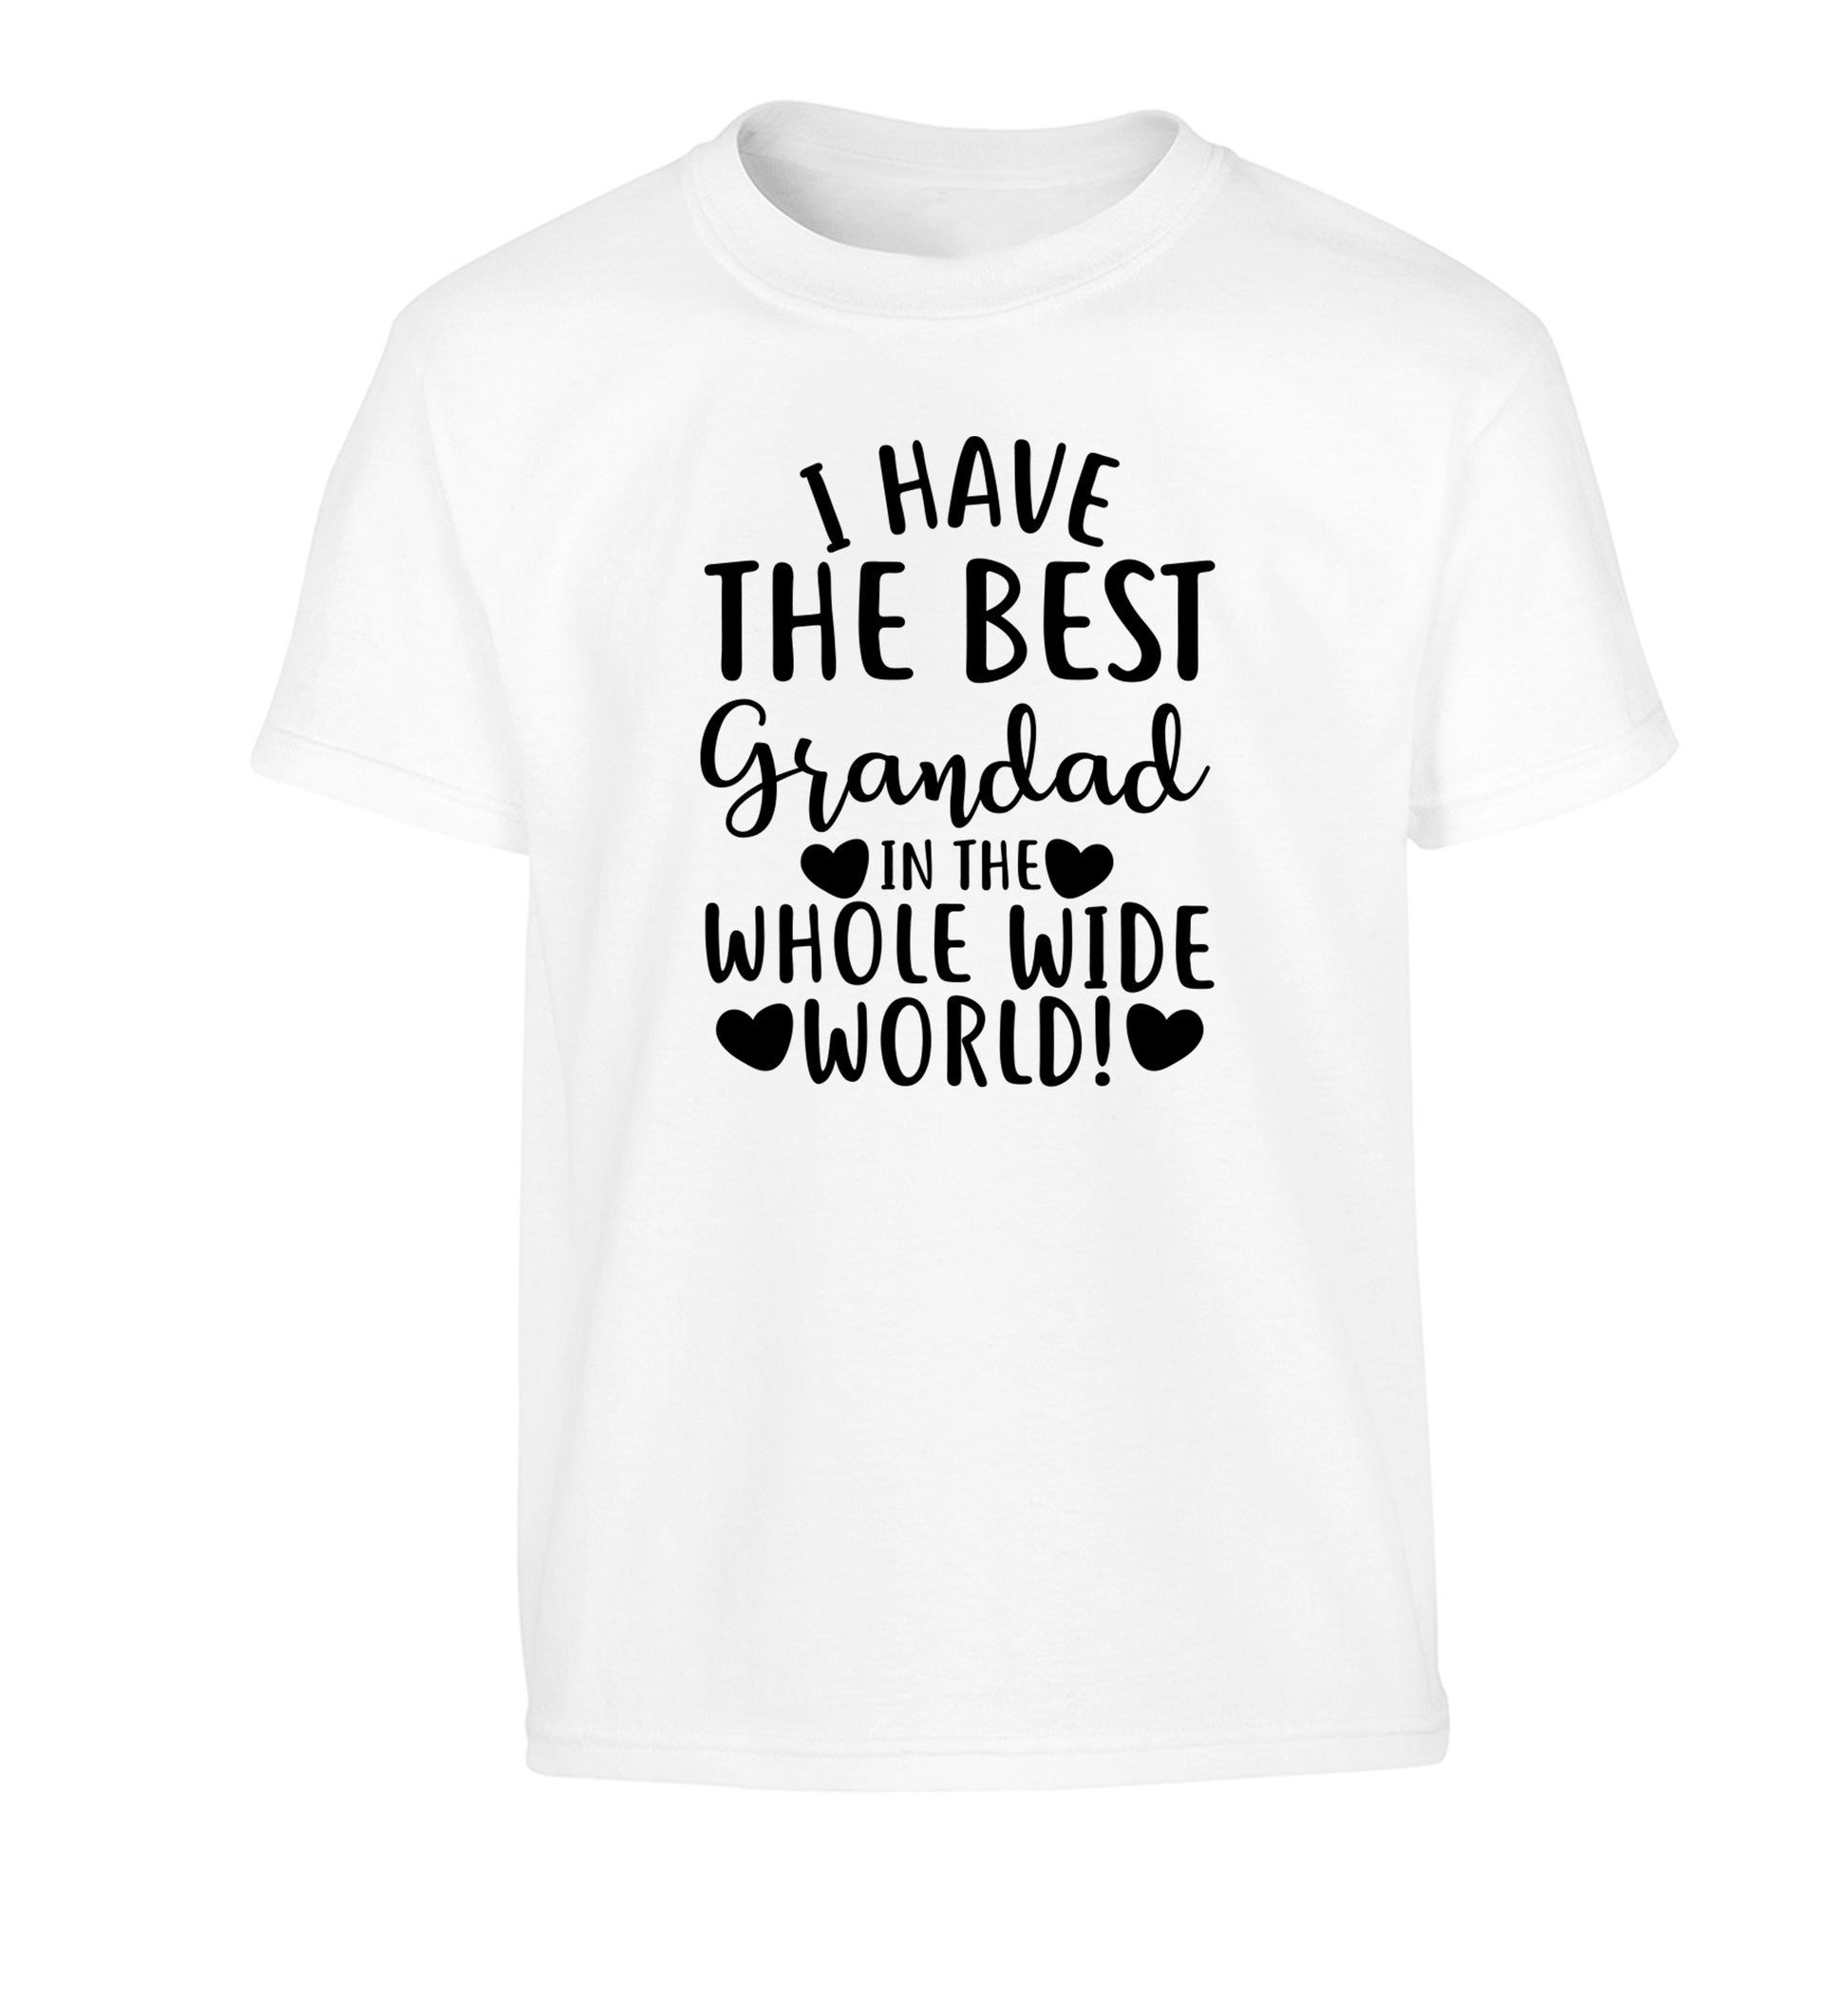 I have the best grandad in the whole wide world! Children's white Tshirt 12-13 Years